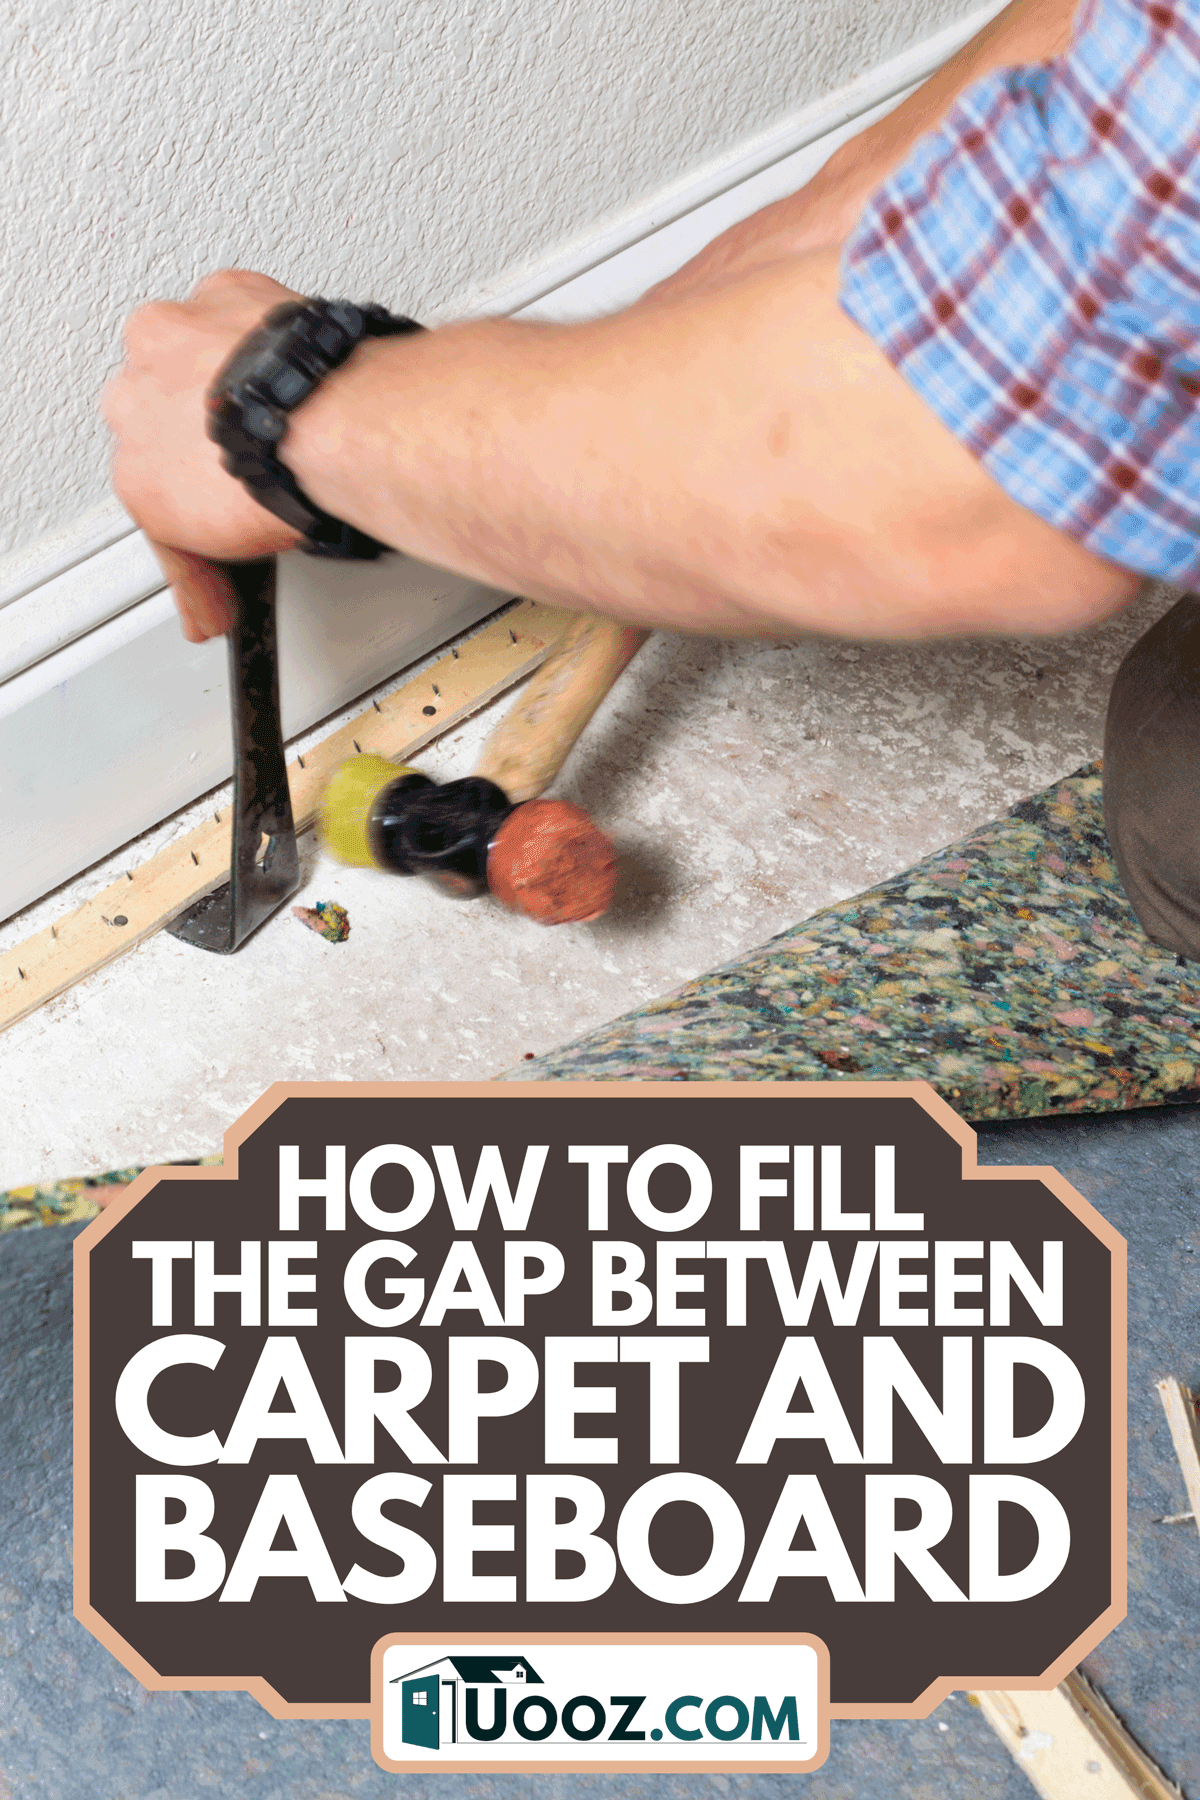 Worker removing old carpet in an American home, How To Fill The Gap Between Carpet And Baseboard